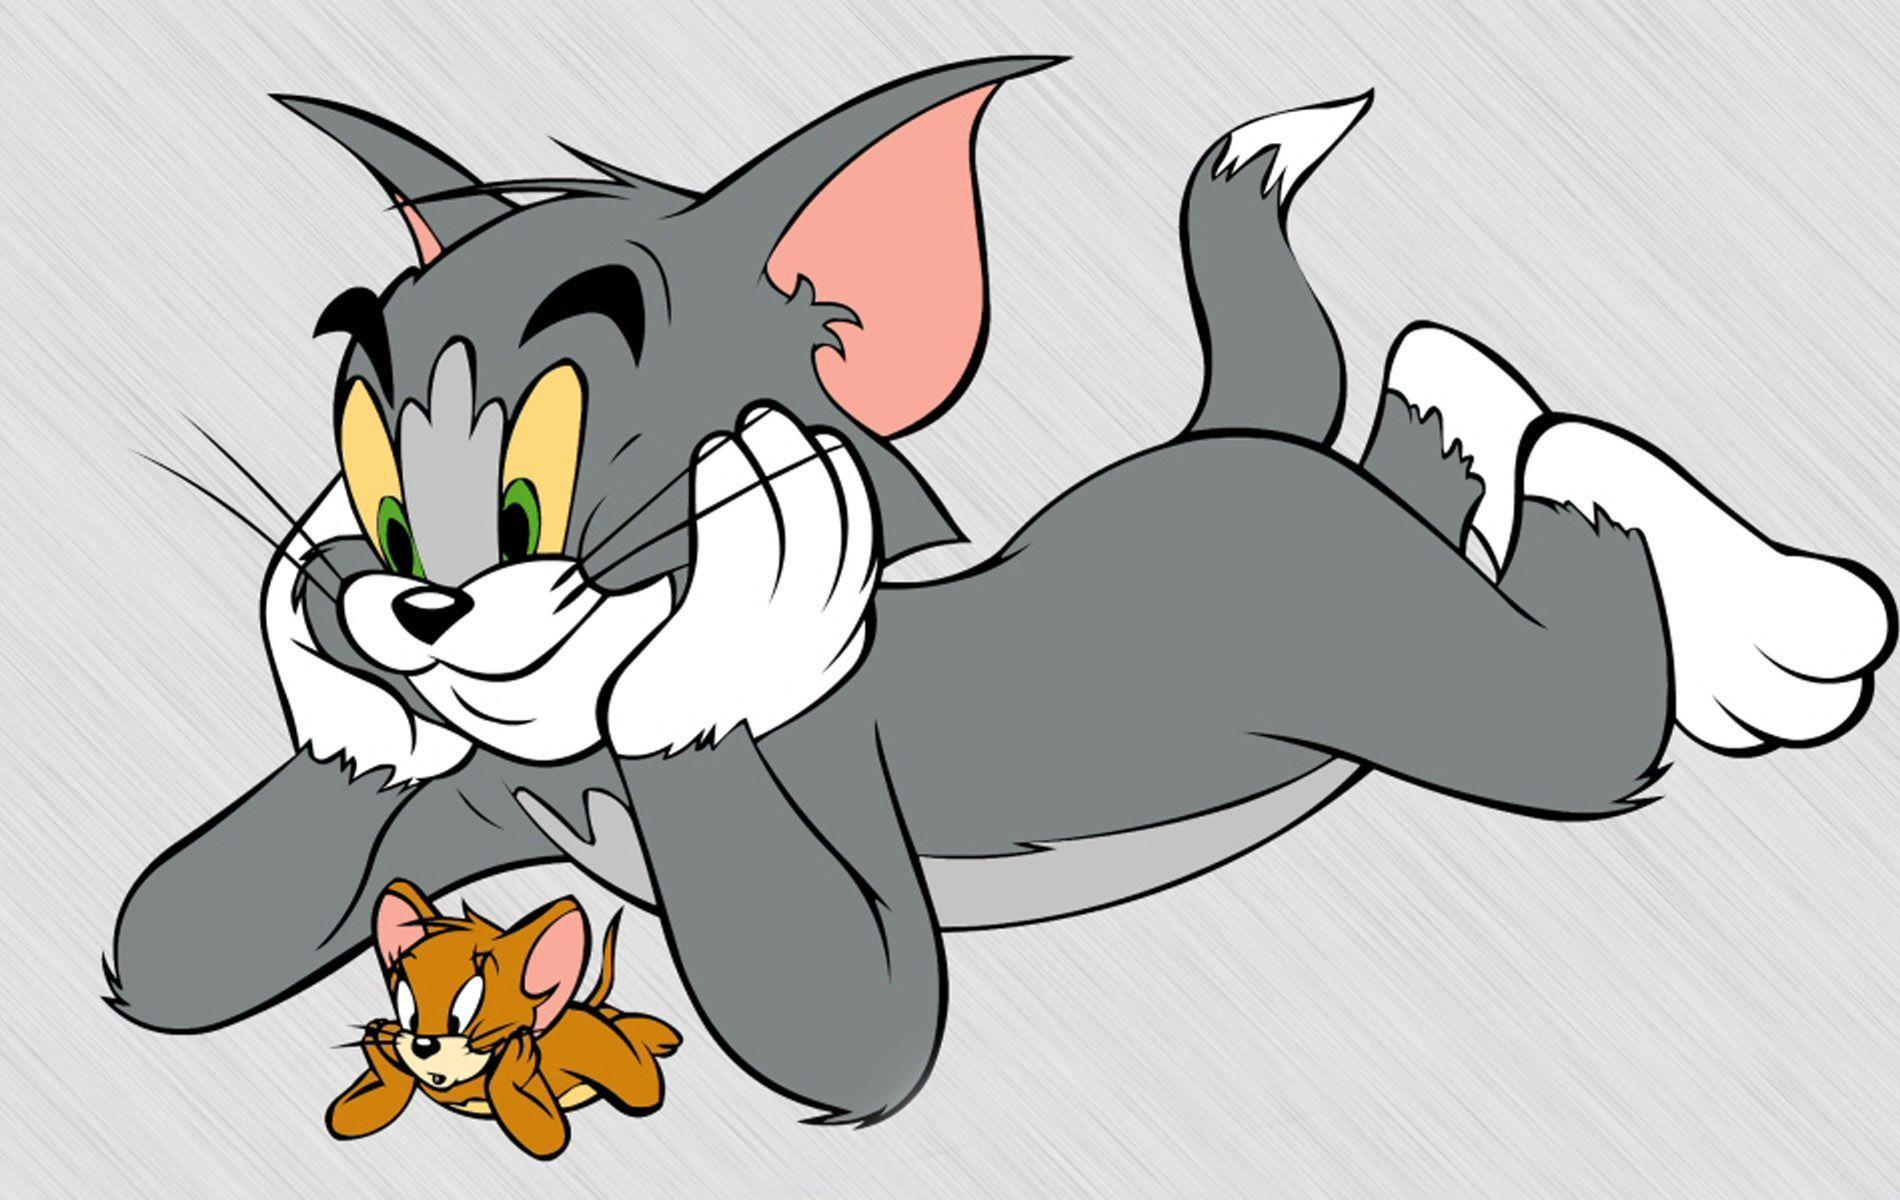 Lovely Wallpapers of Funny Characters "Tom & Jerry"Photography